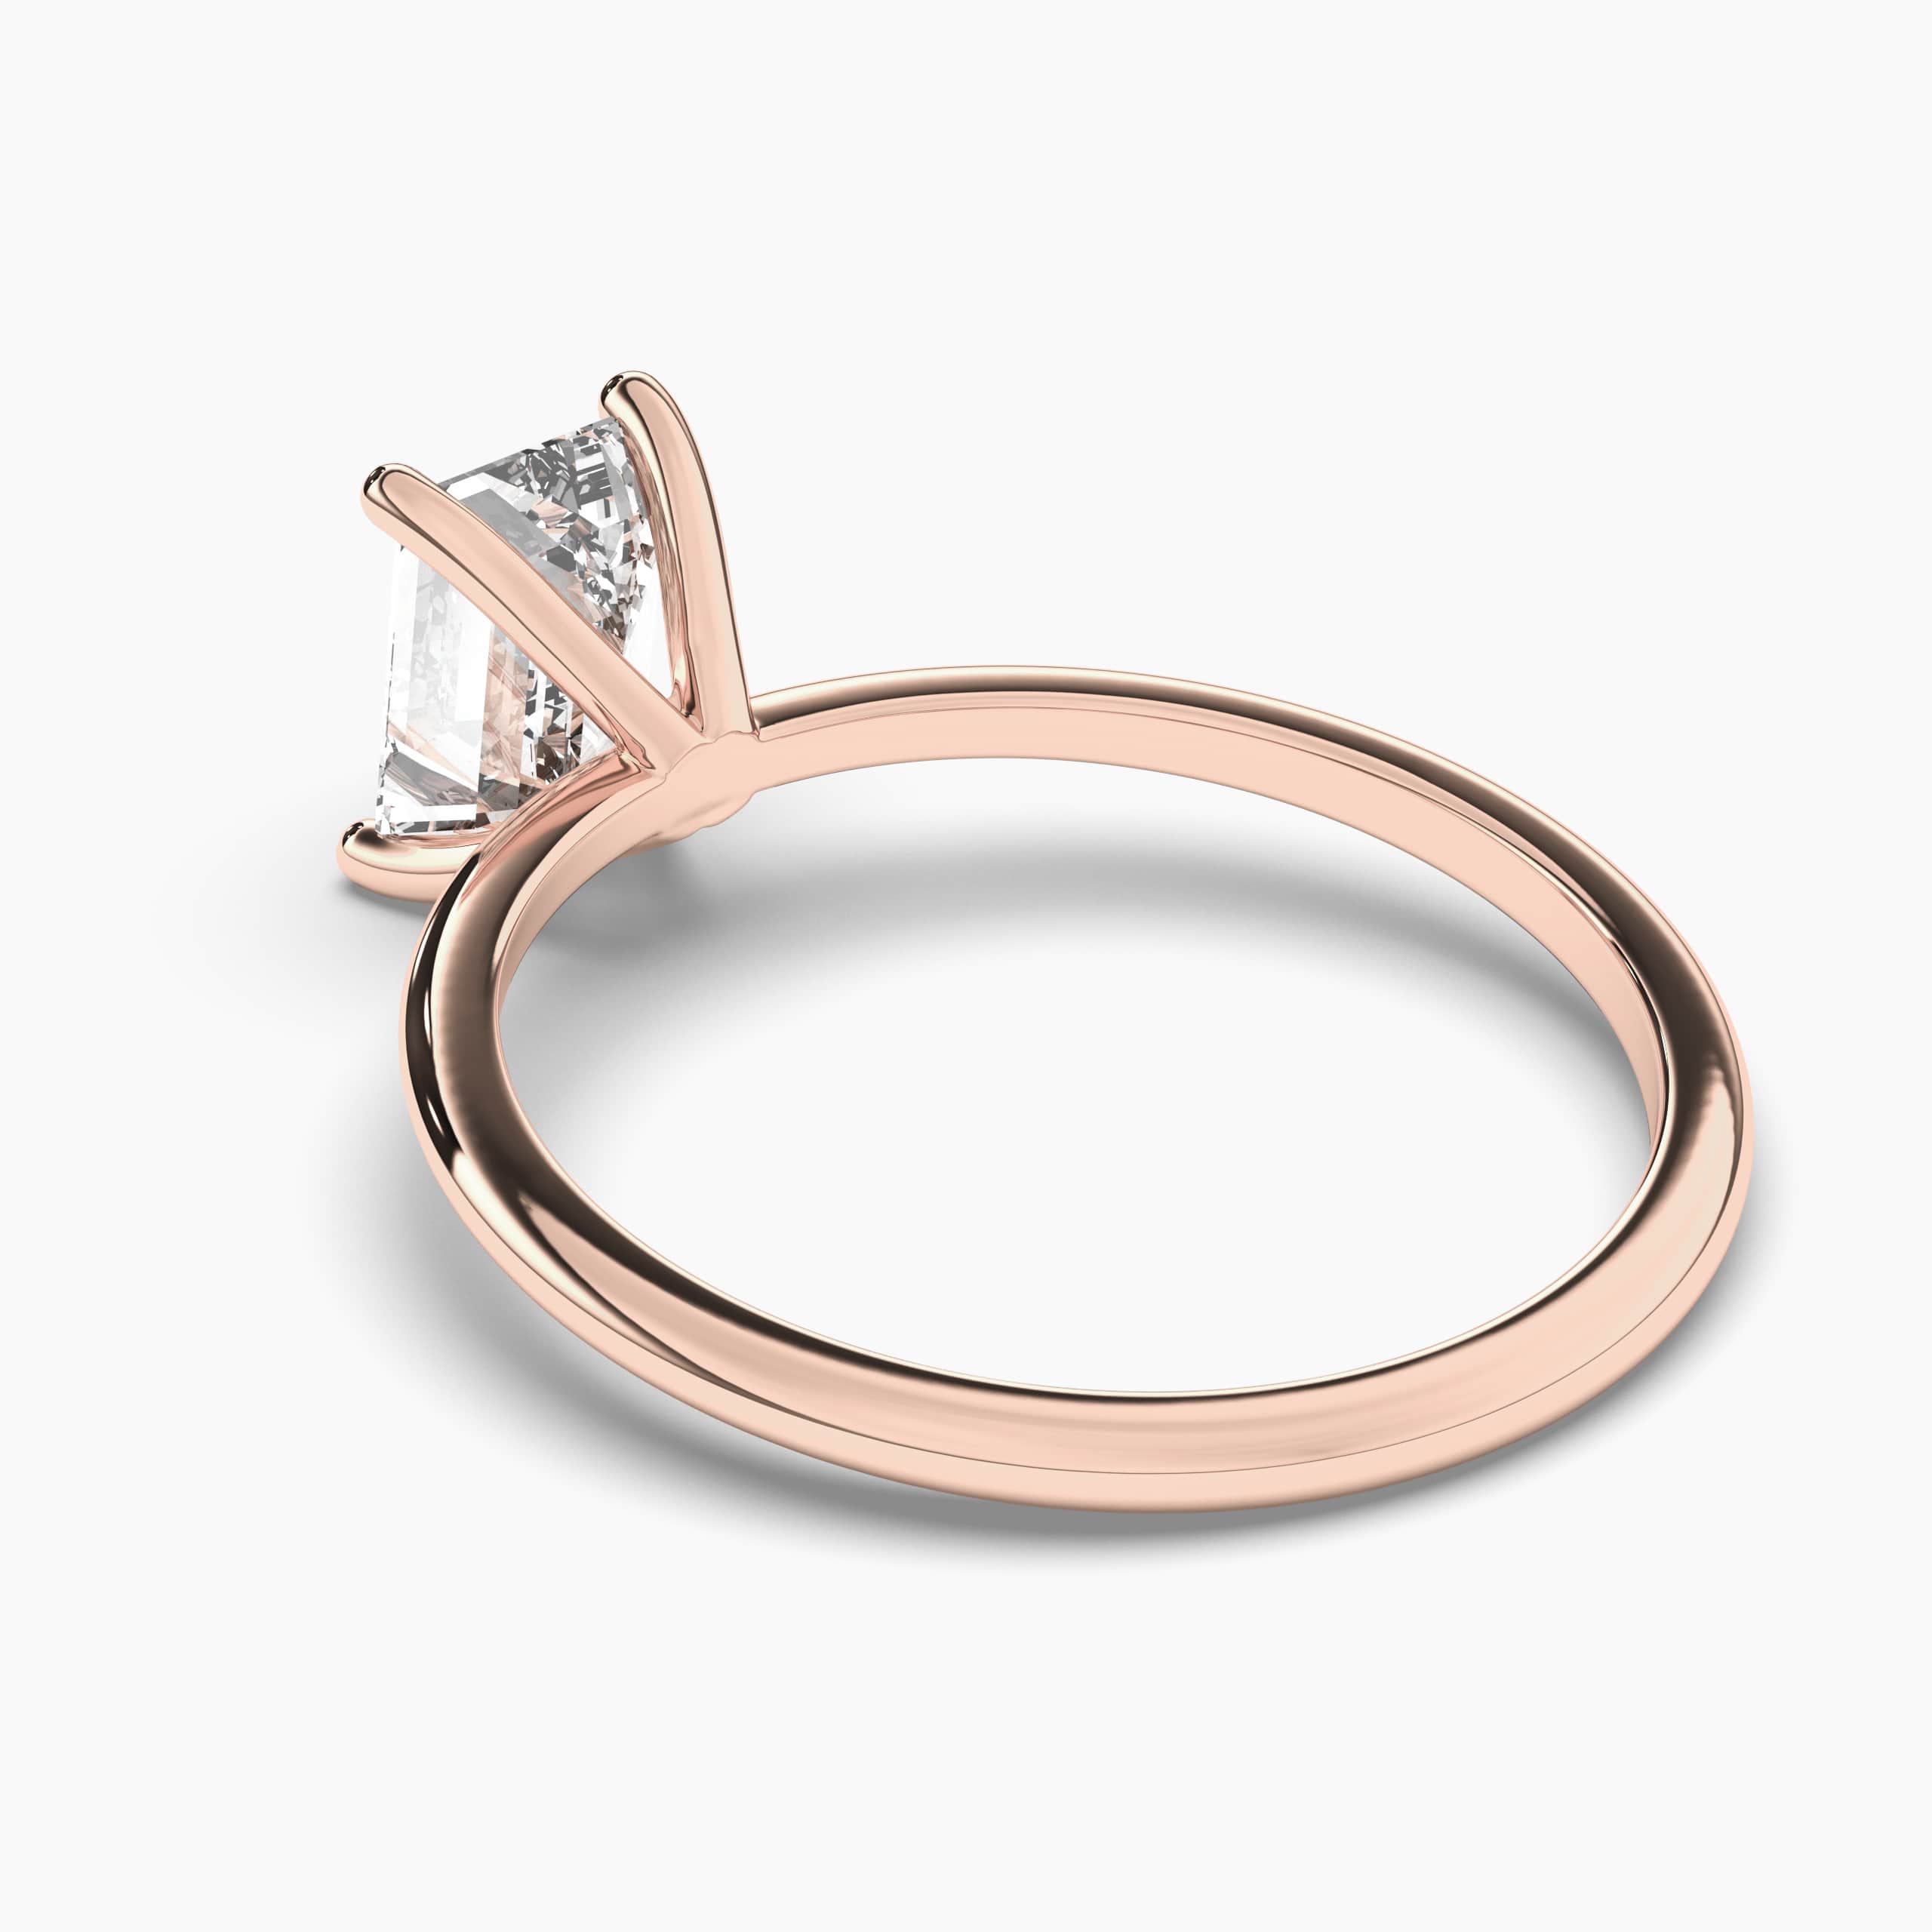 Emerald diamond four-claw solitaire engagement ring set in rose gold